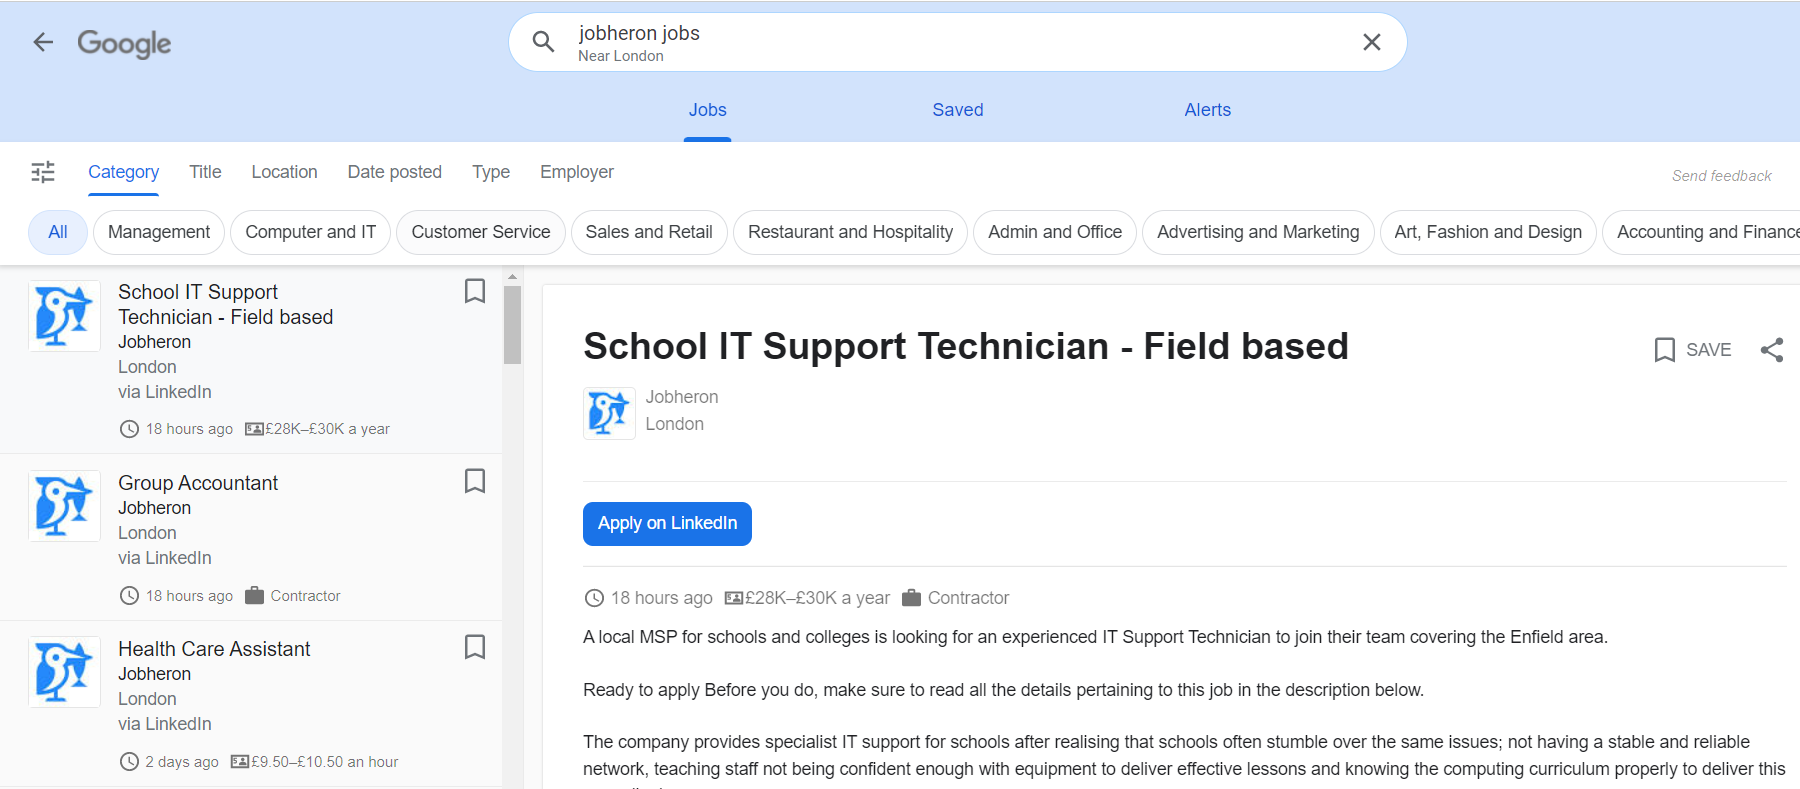 Snippet of GoogleJobs' user dashboard where you can search for and upload job posts for free. 